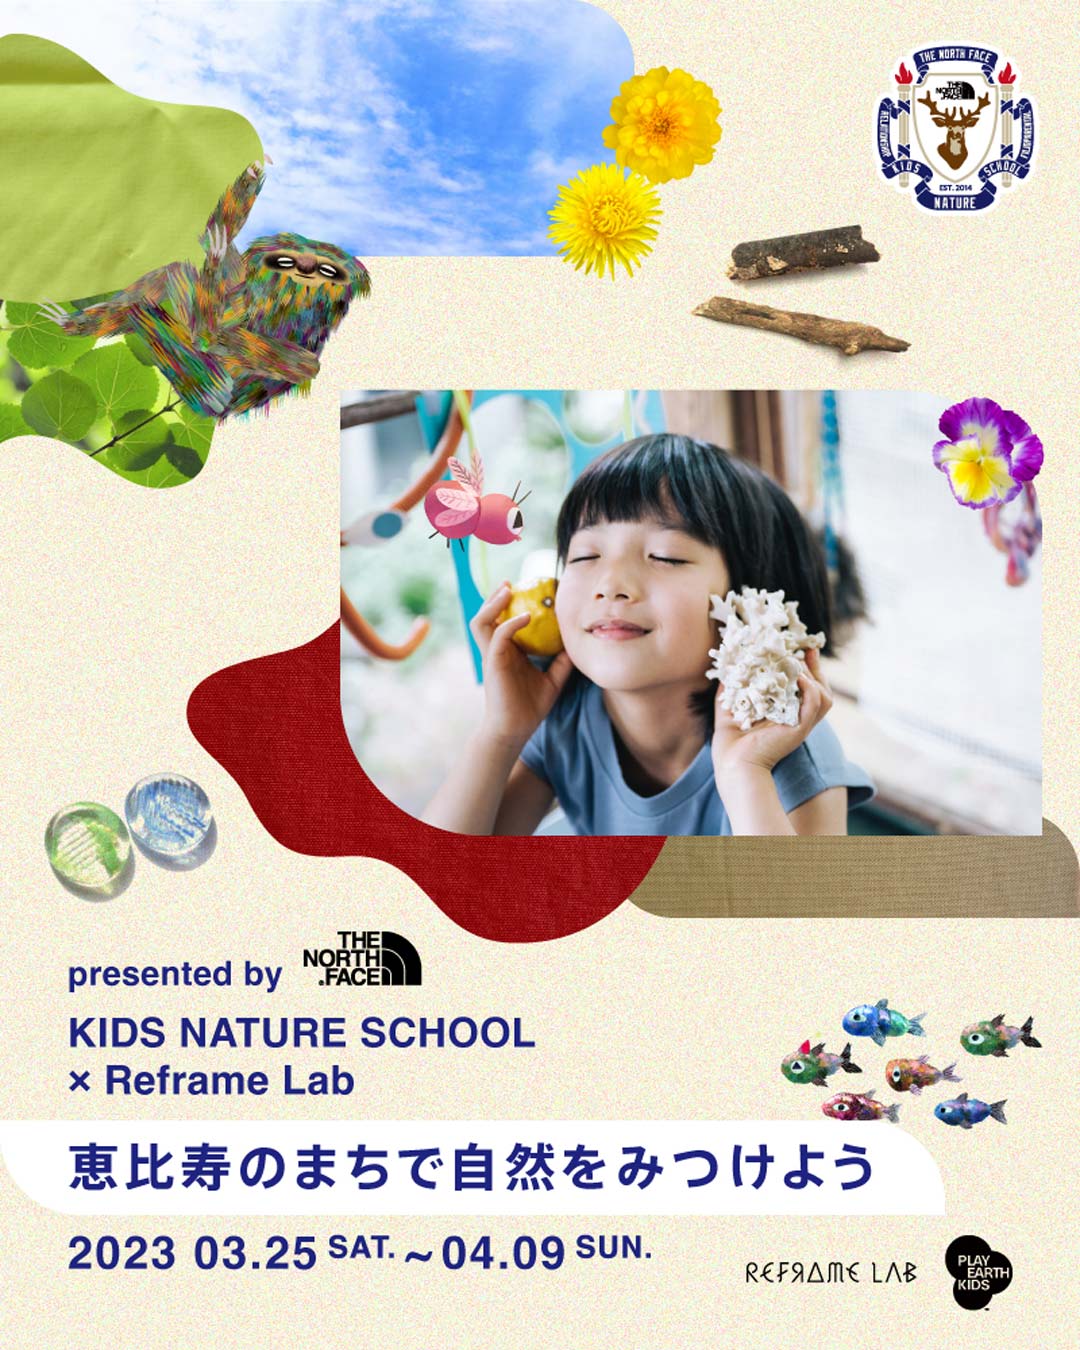 THE NORTH FACE×Reframe Lab KIDS NATURE SCHOOL 恵比寿ガーデンプレイス